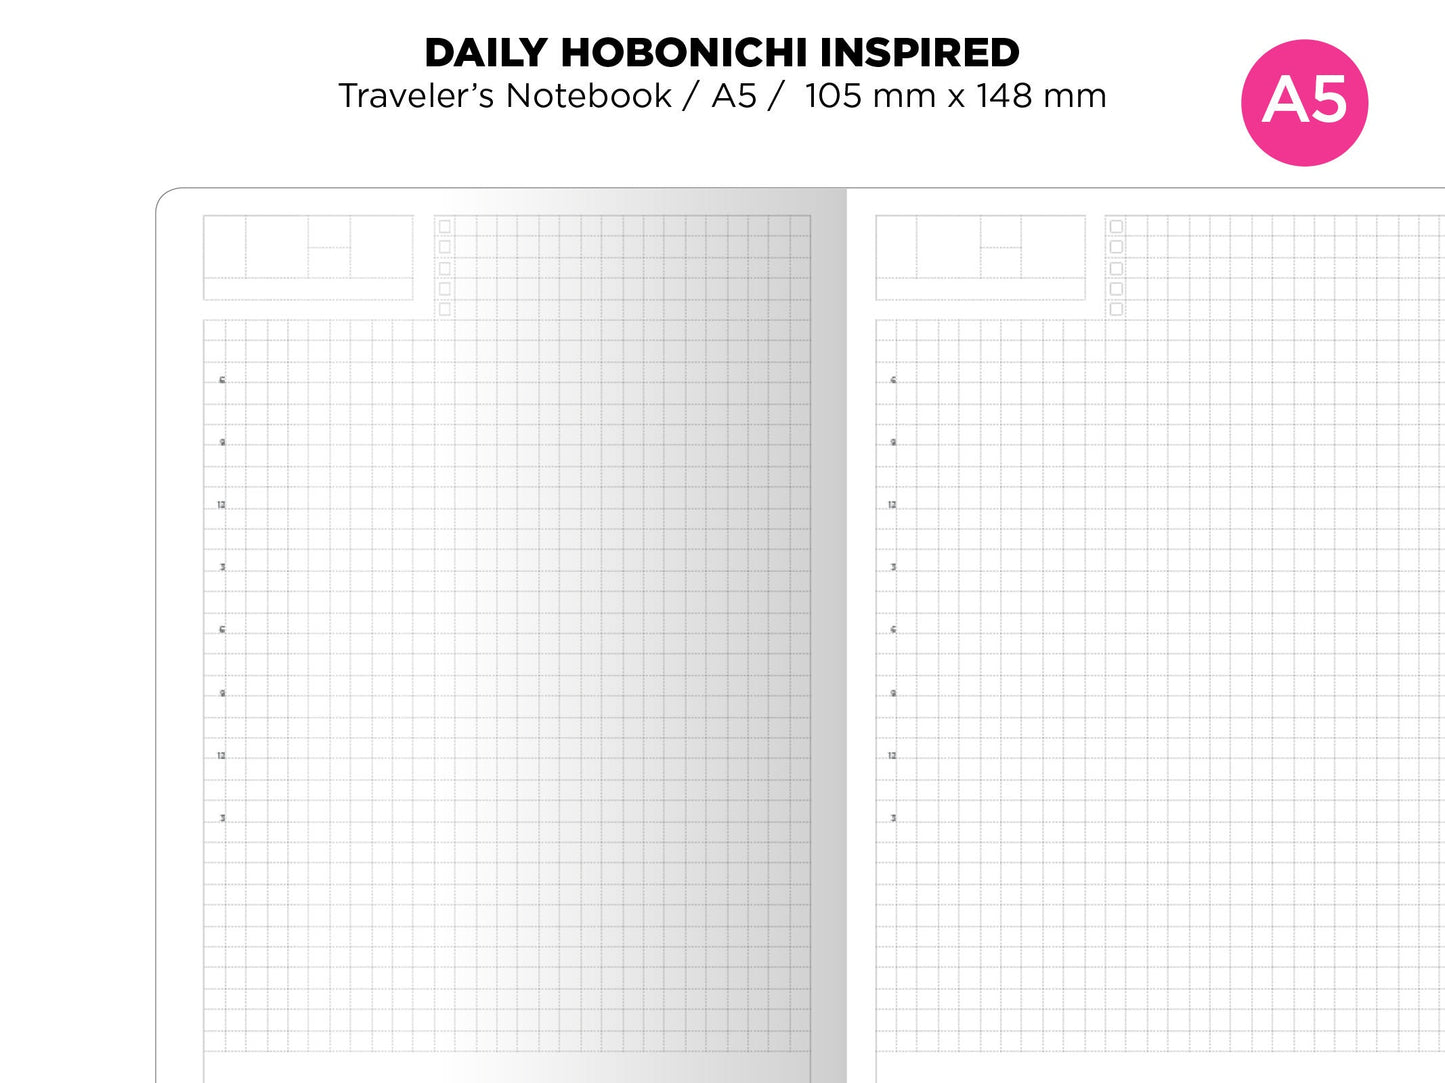 TN A5 Daily Hobonichi Inspired With Quote Printable Traveler's Notebook Insert